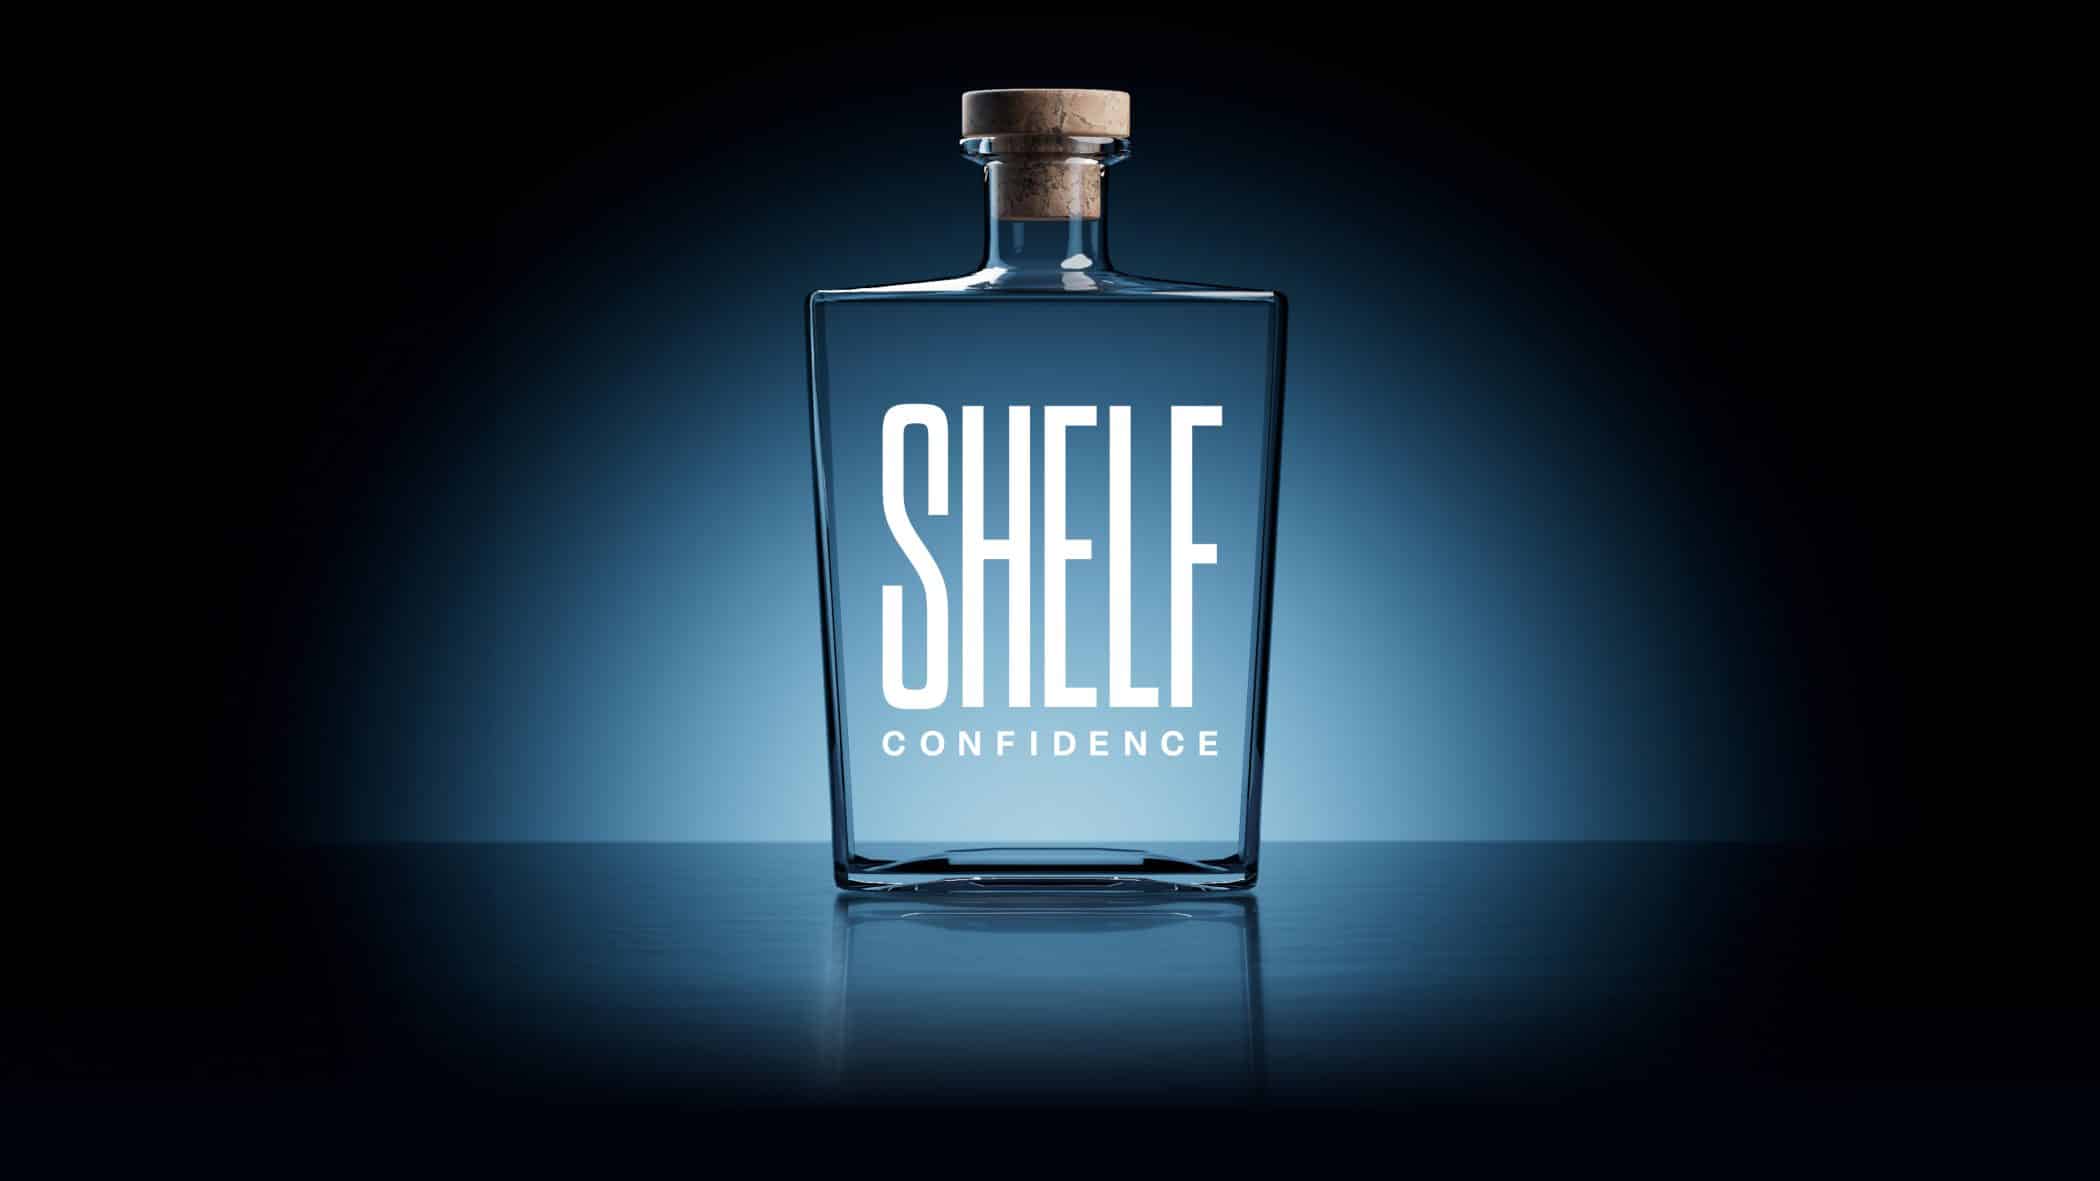 Square bottle with bartop closure on a dark blue background.